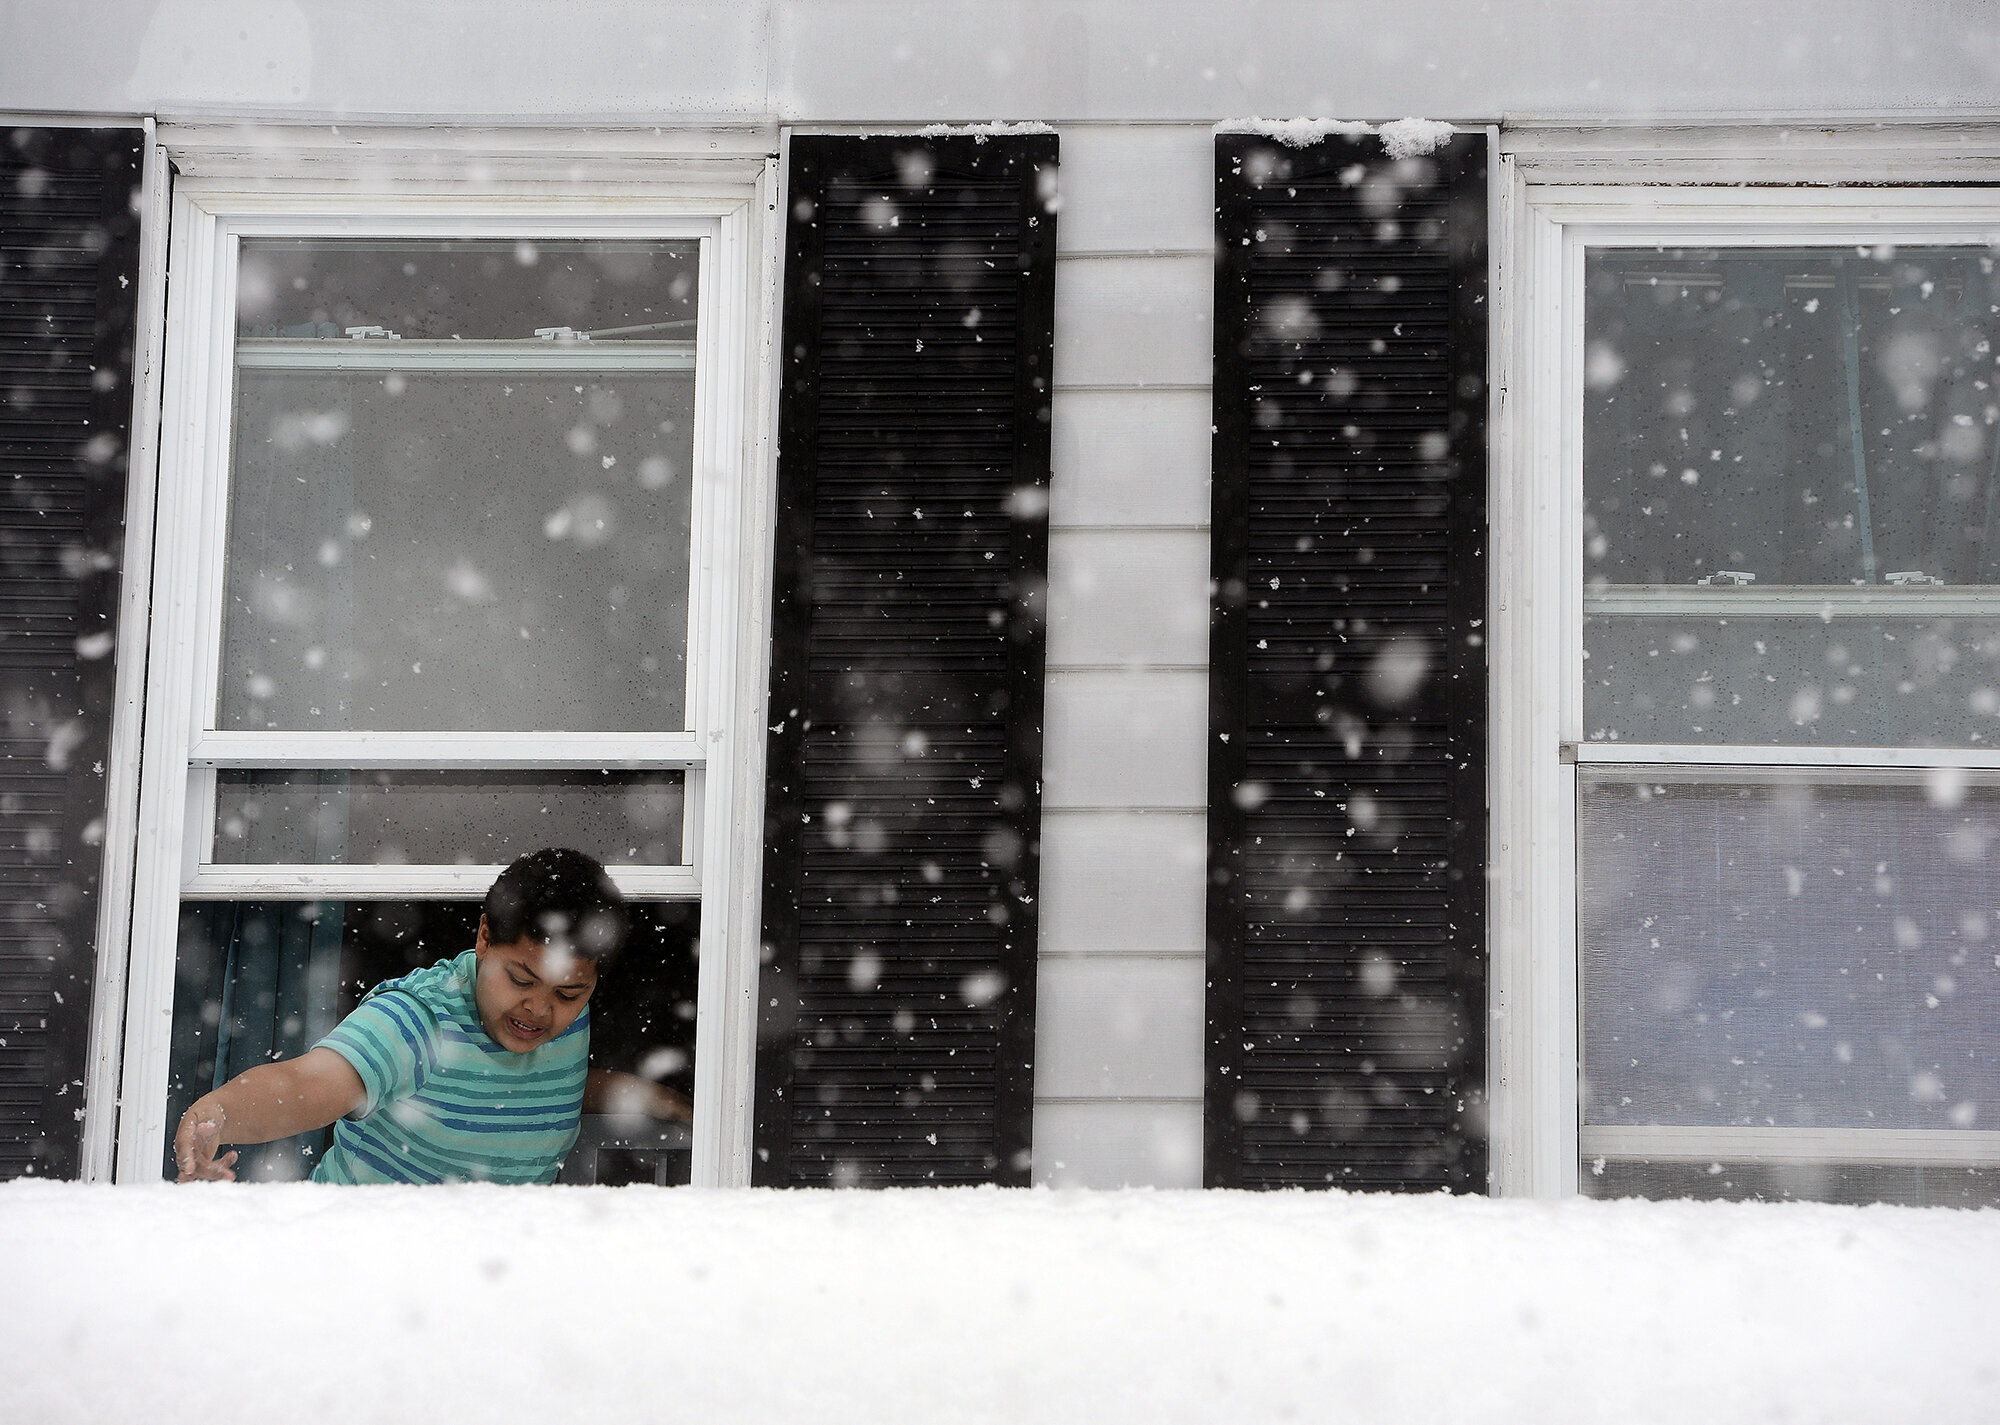  Paulie Perez Hughes, 10 of New London, uses his fingers to check how much snow has accumulated on the roof as he leans out the window during the snowstorm on Tuesday, March 13, 2018 at his cousin's home on West Coit Street in New London. "I think I 